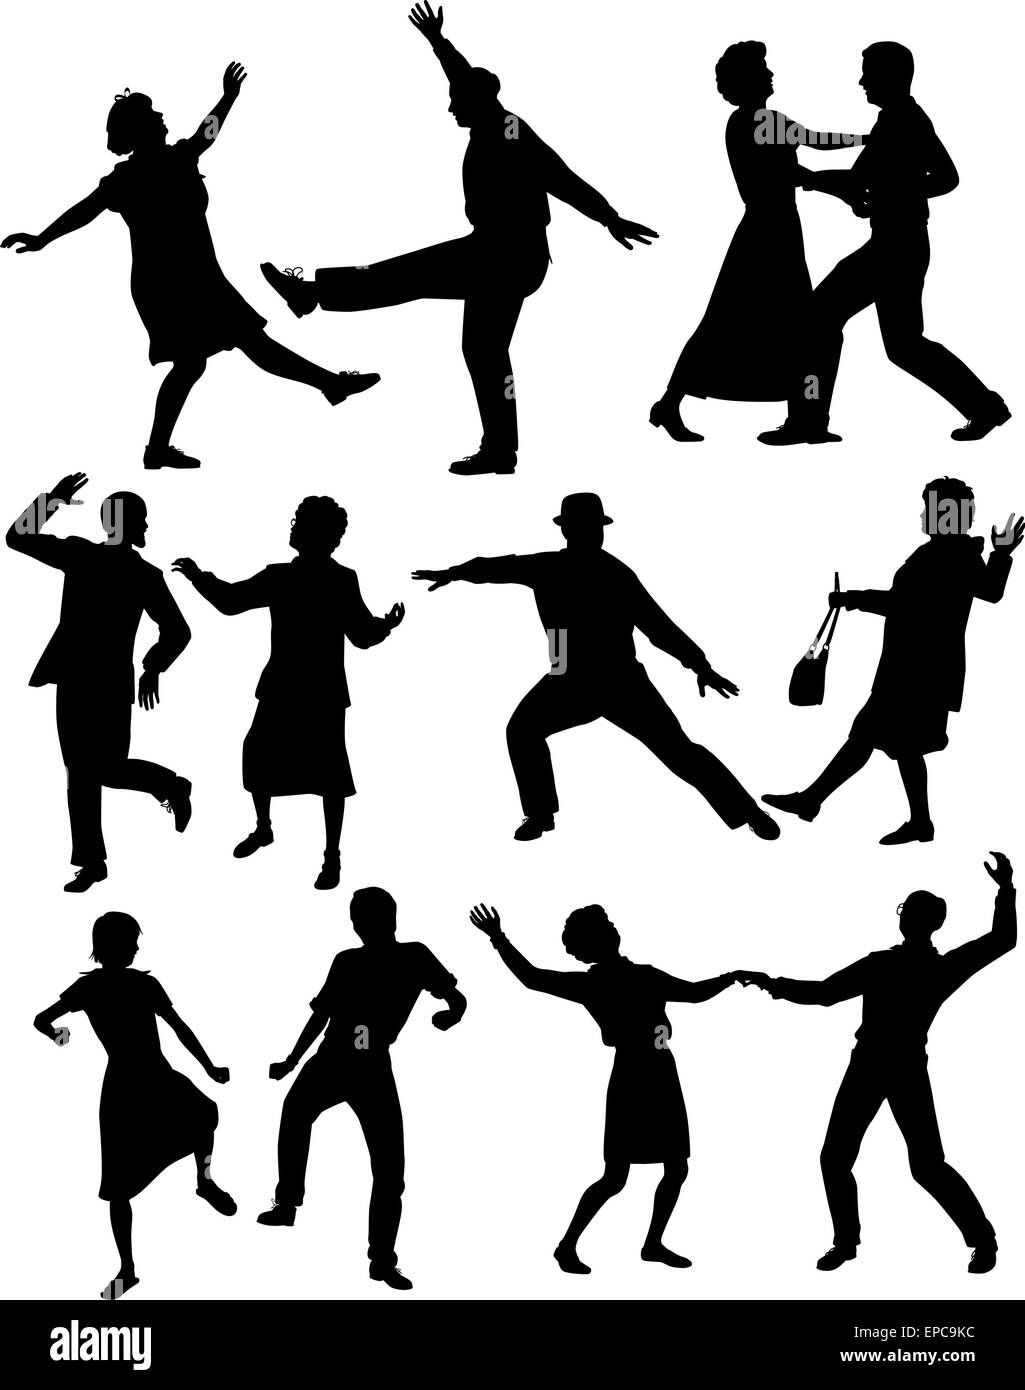 Set of editable vector silhouettes of elderly couples dancing together with all figures as separate objects Stock Vector